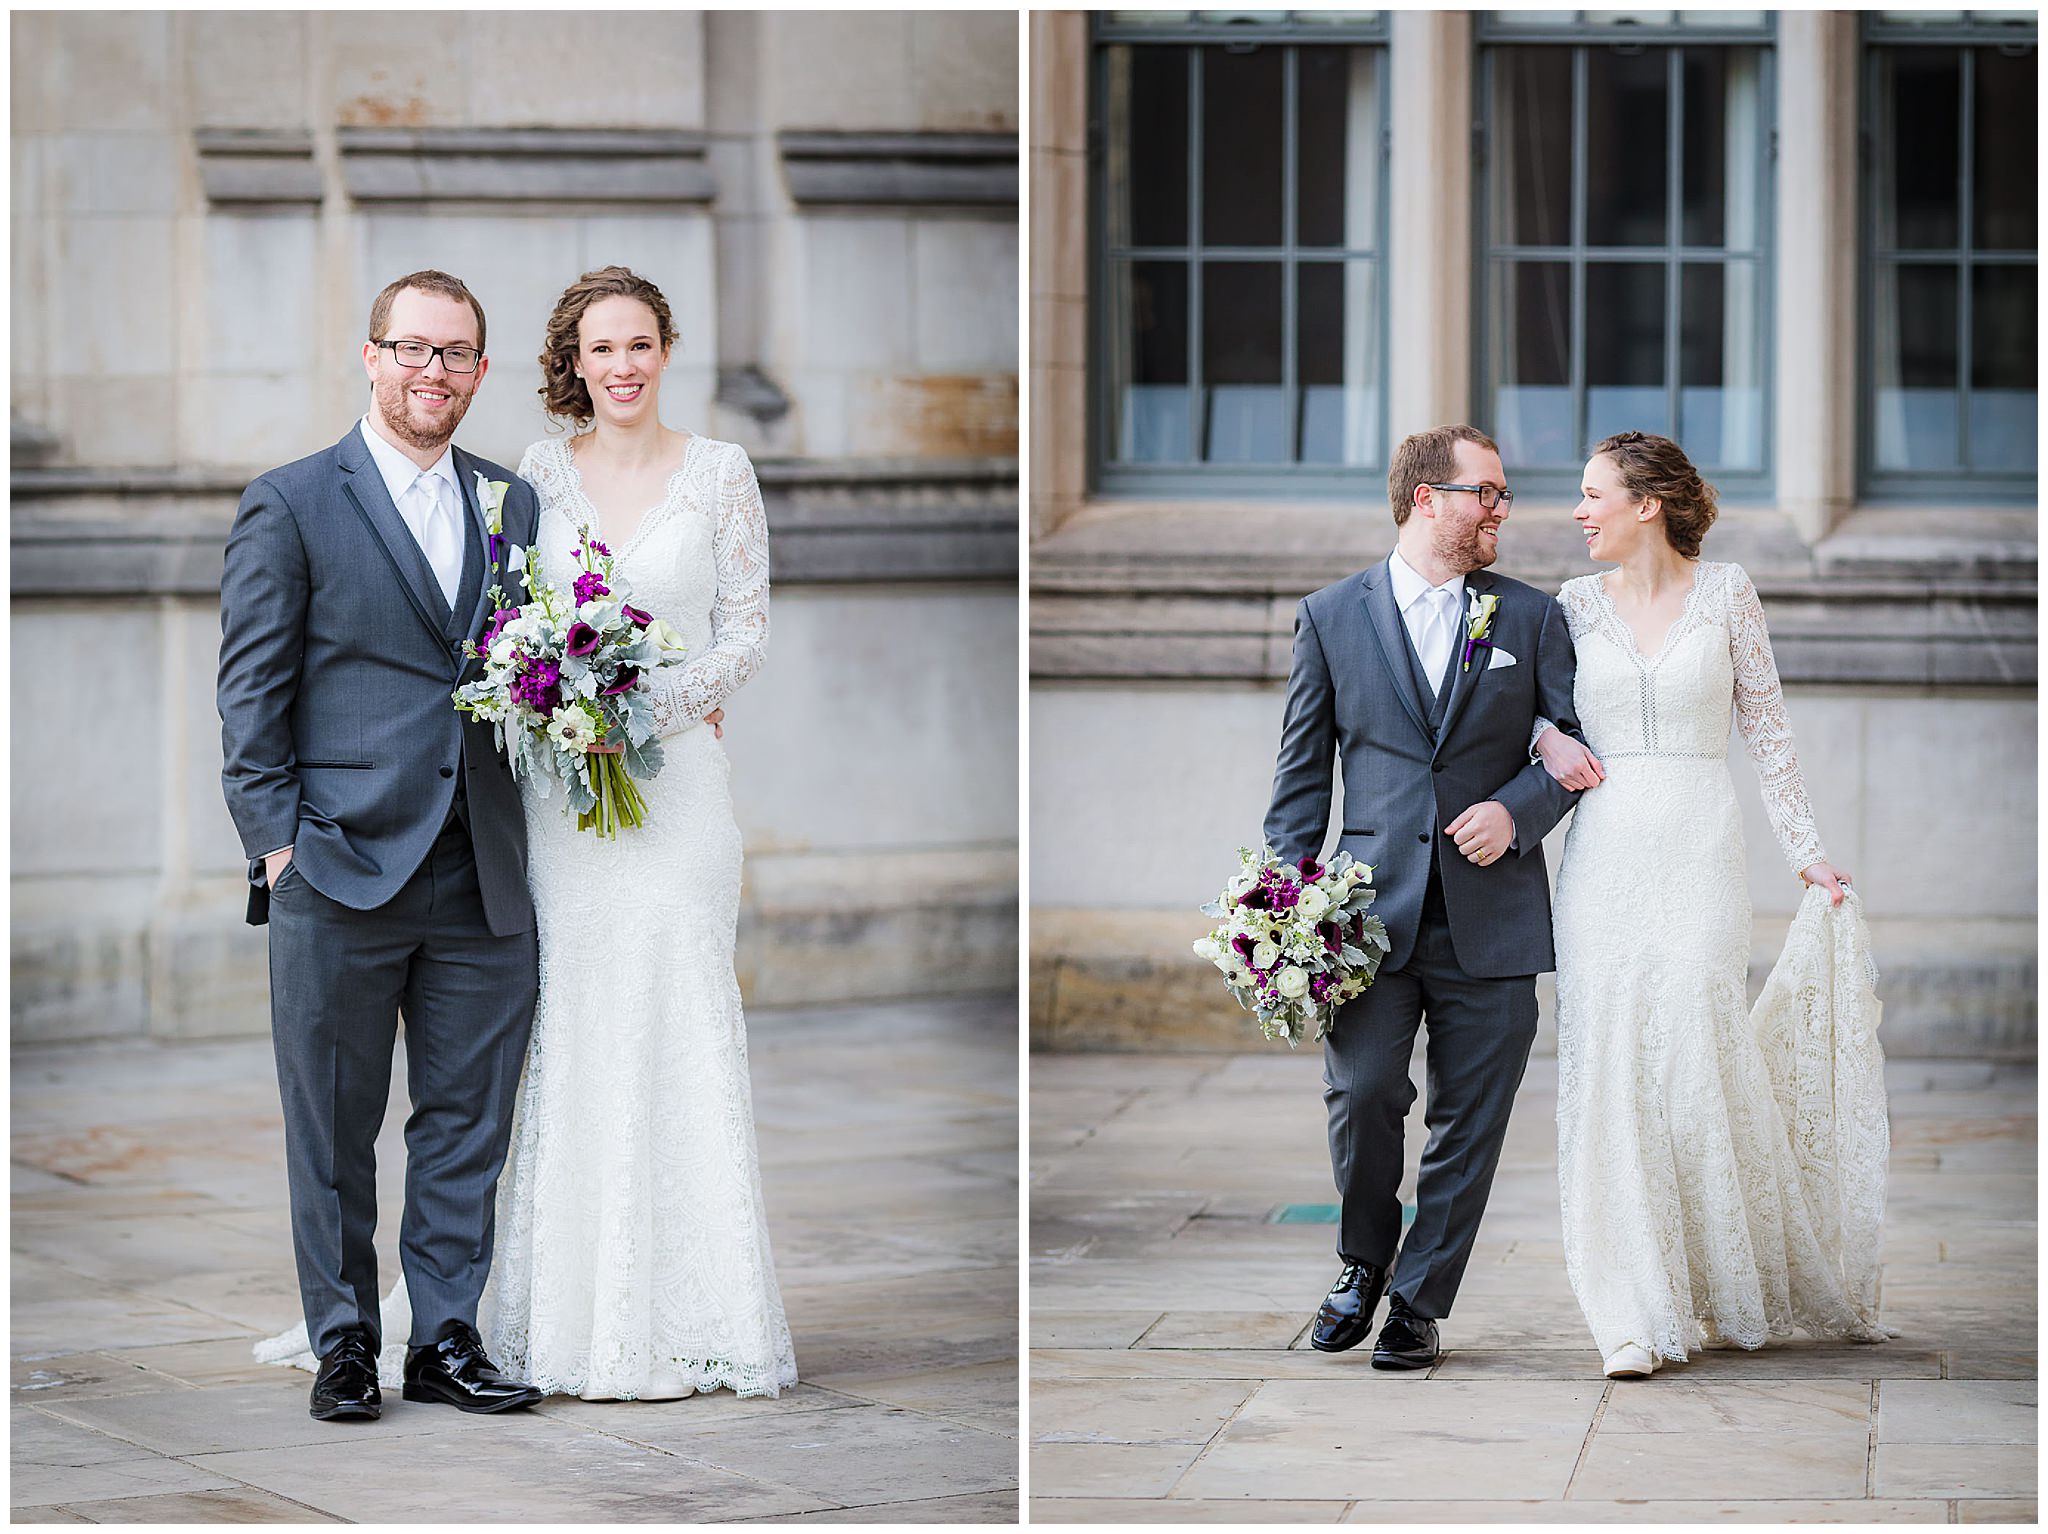 Newlyweds walk and laugh during portraits at the Cathedral of Learning; Wtoo by Watters wedding dress from Bridal Beginning